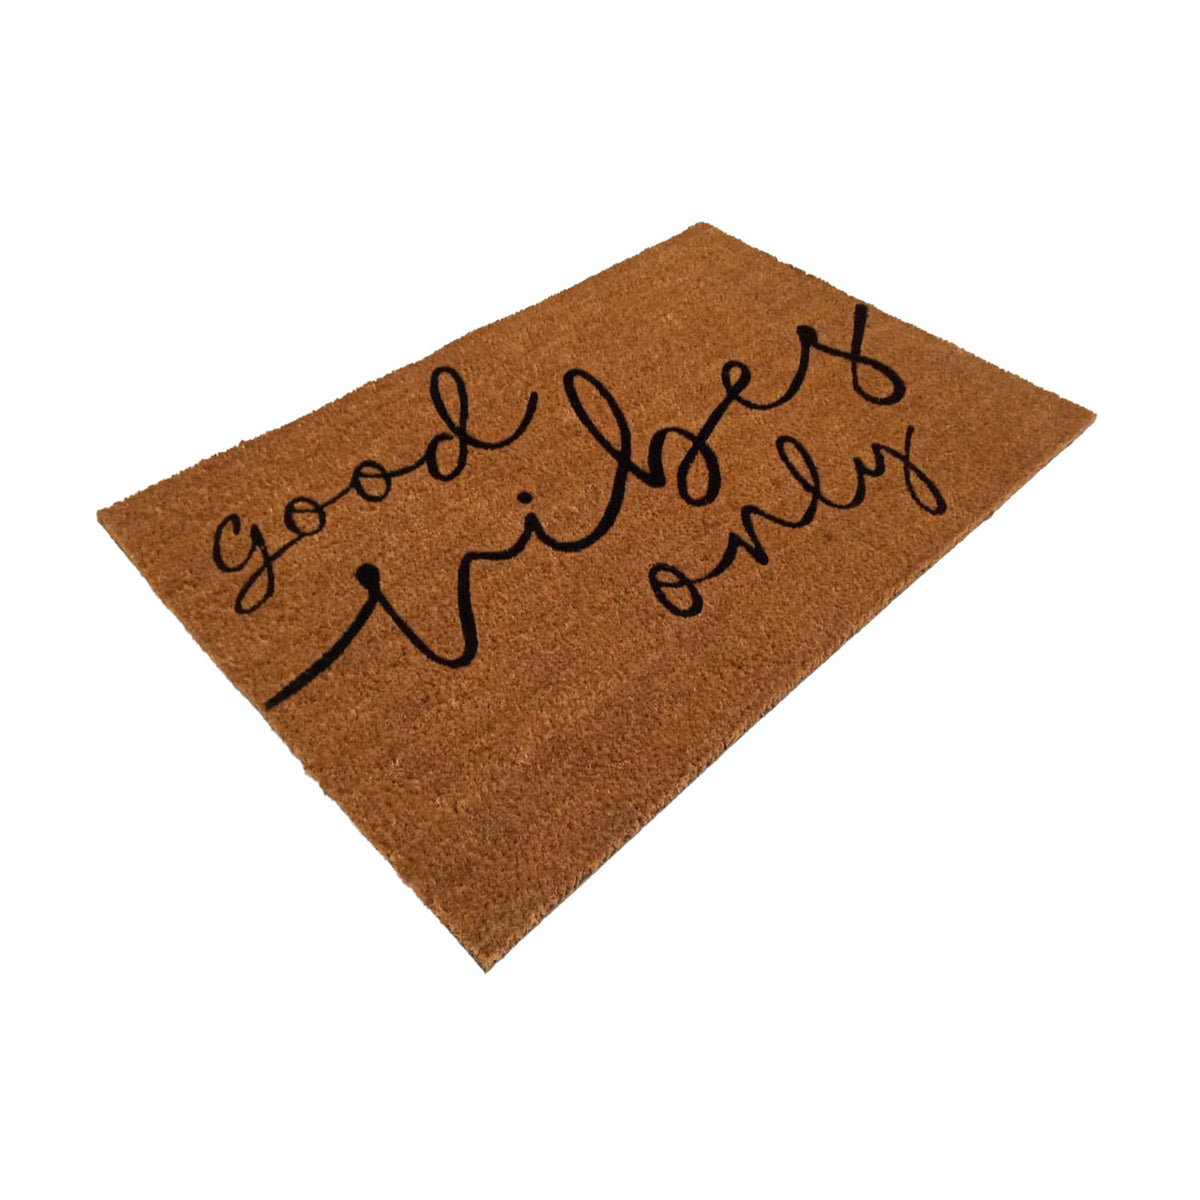 Funny Good Vibes Only Printed Natural Coir Door Mat